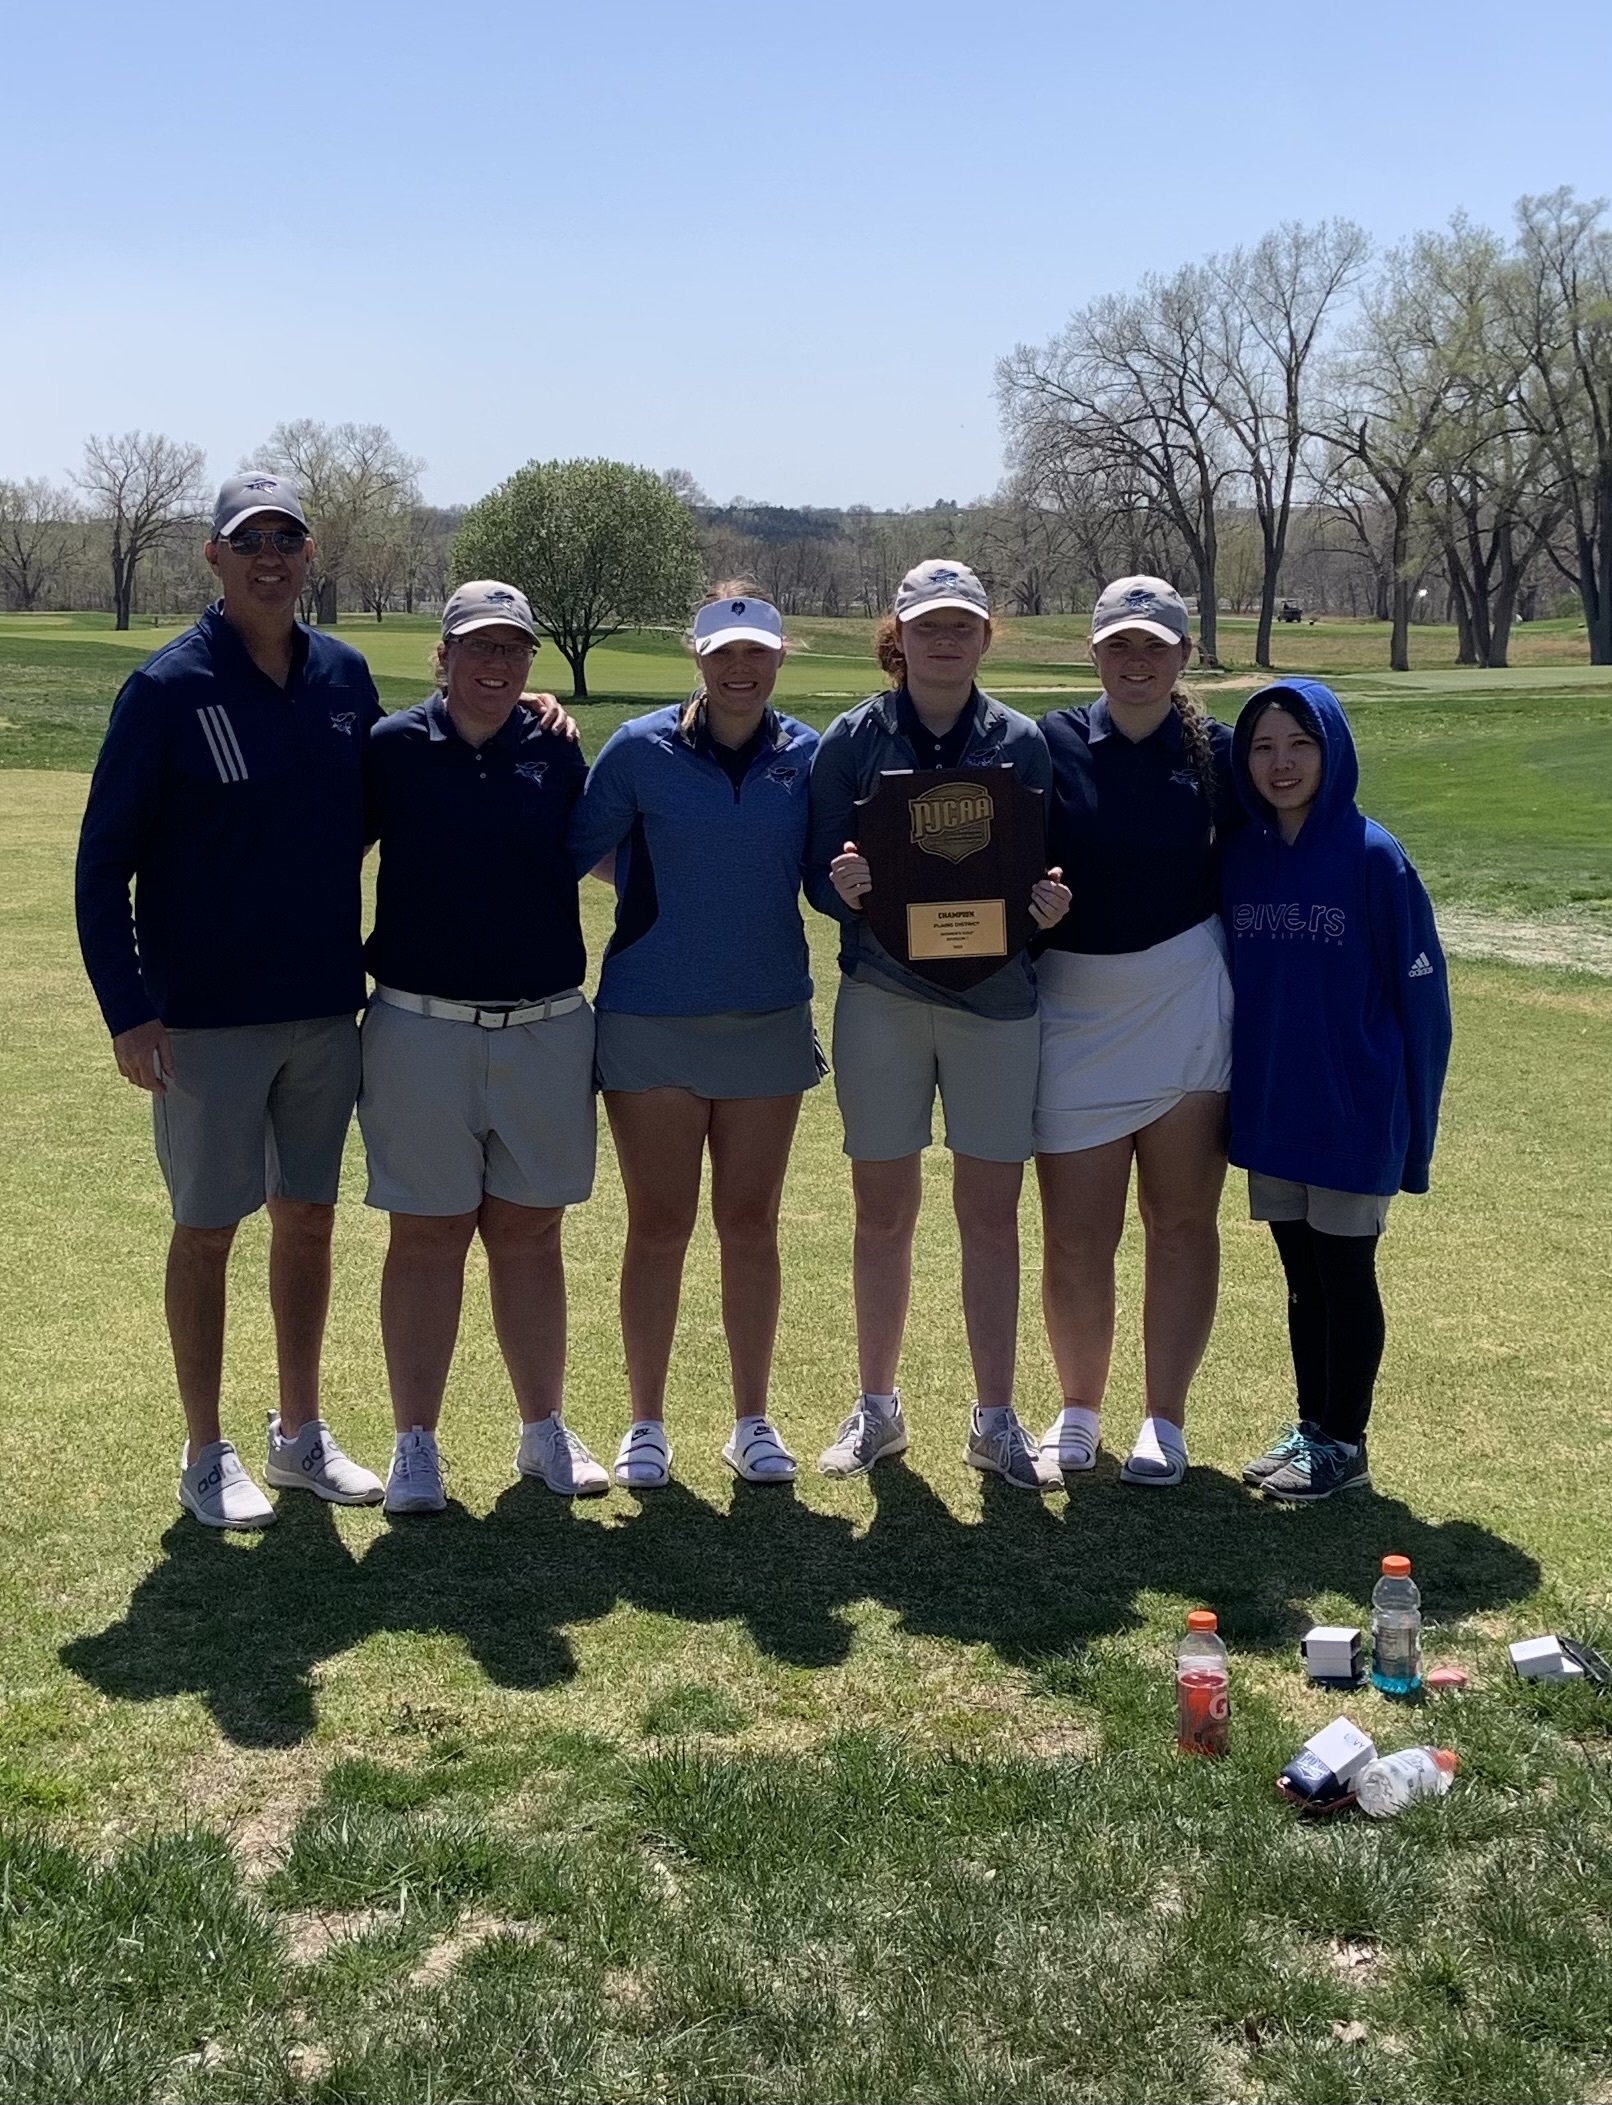 New District But Same Results for the Women's Golf Team